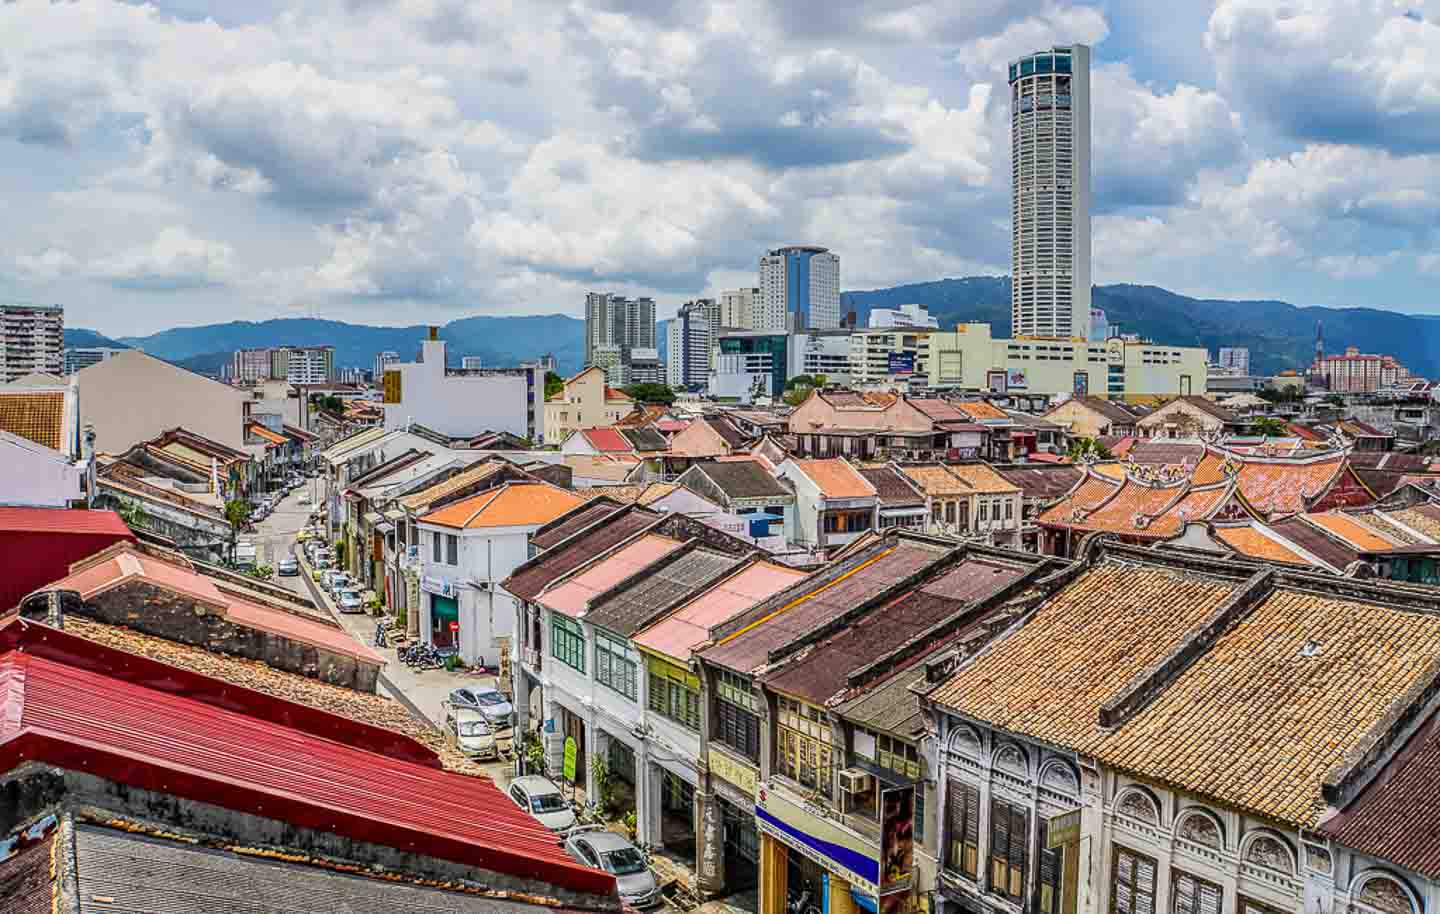 Reasons to visit Georgetown Penang Malaysia 3 - Chandra Muzaffar on Penang's Disclosure: Only Half The Story Is Being Told